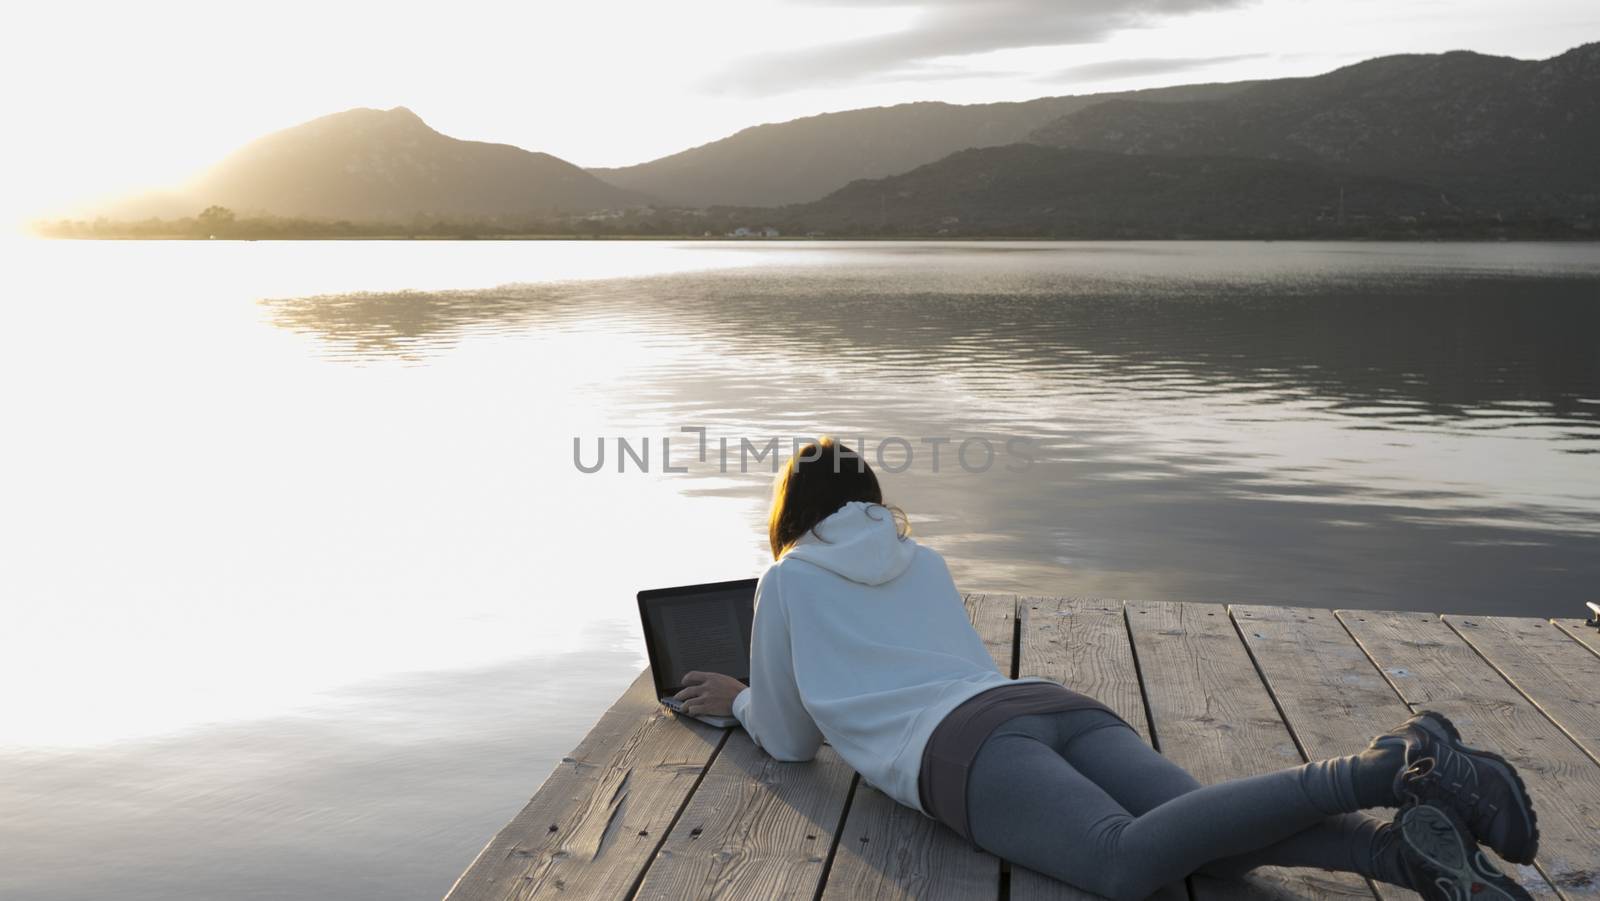 Internet freelance job choice concept: a young woman works on her laptop lying on a pier by a lake at sunset